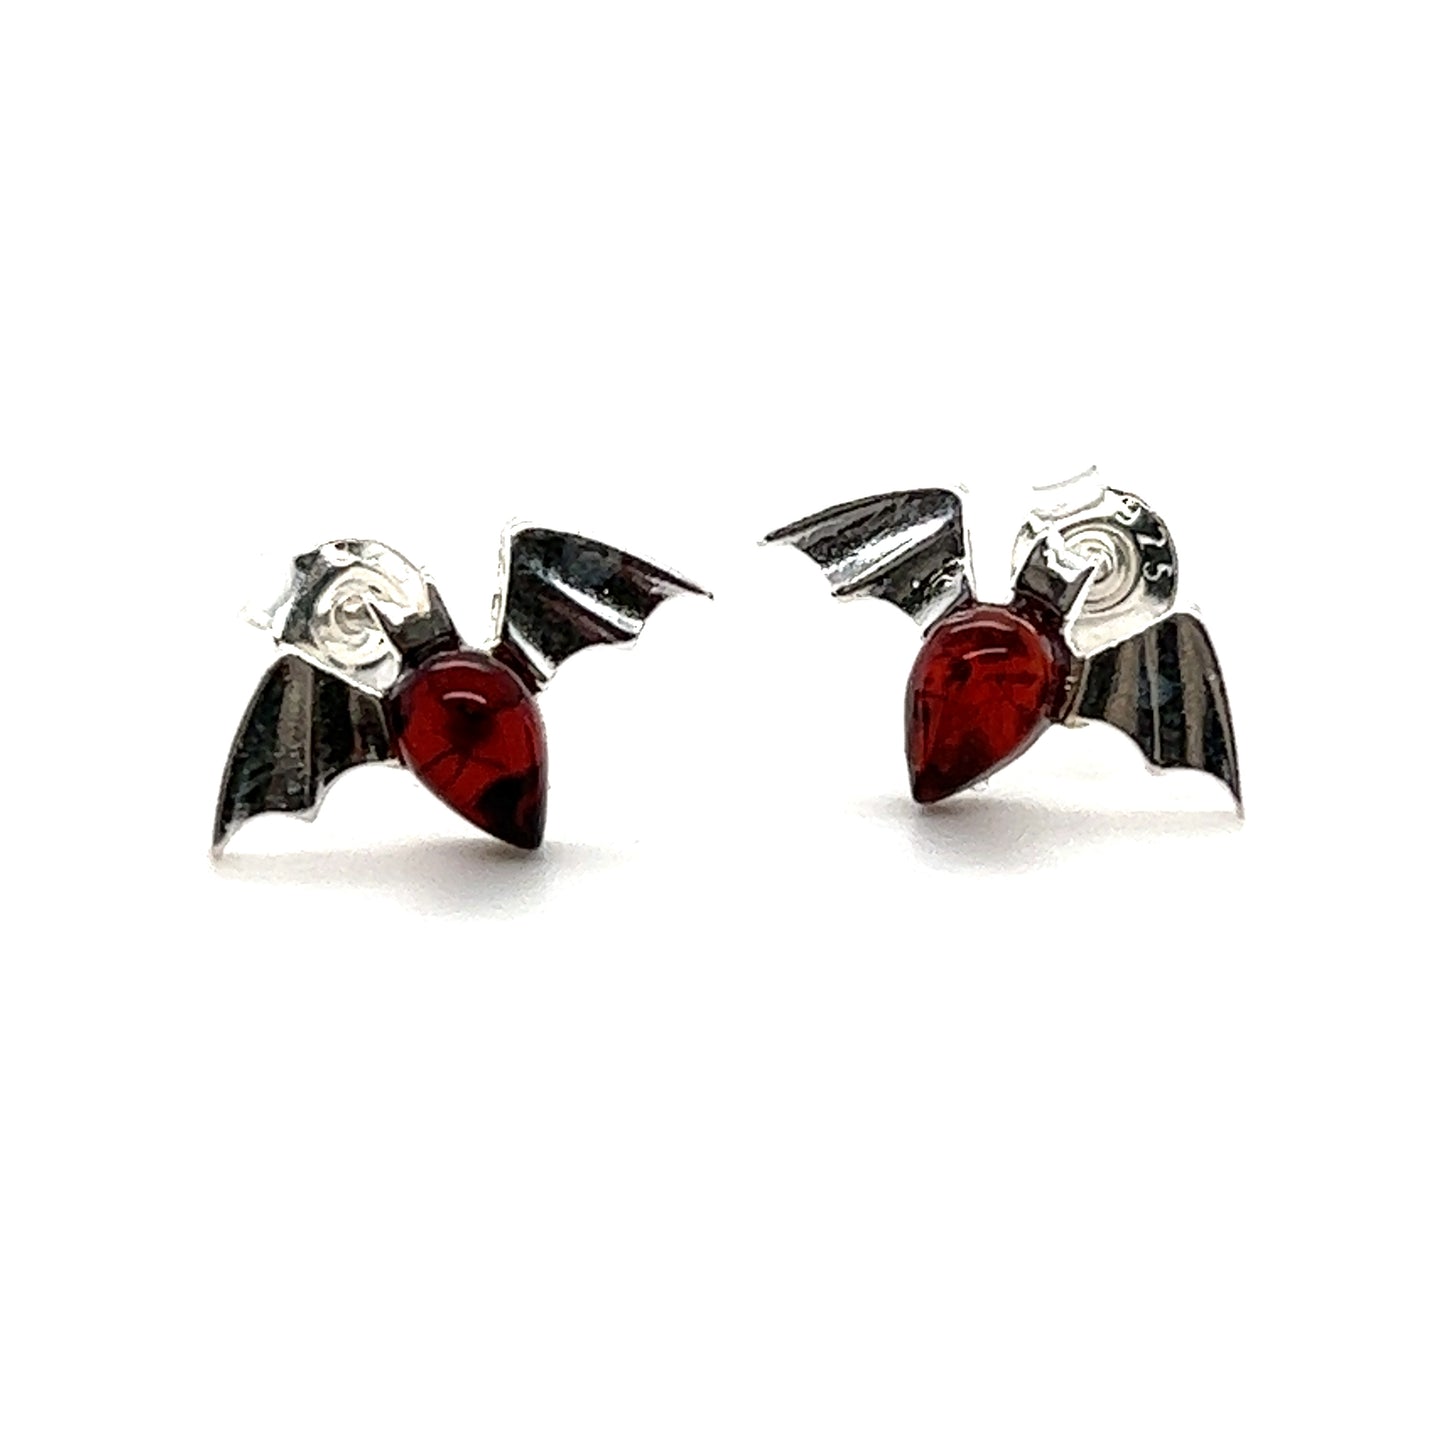 A pair of Enchanting Baltic Amber Bat Stud Earrings from Super Silver with red crystals in cherry colors.